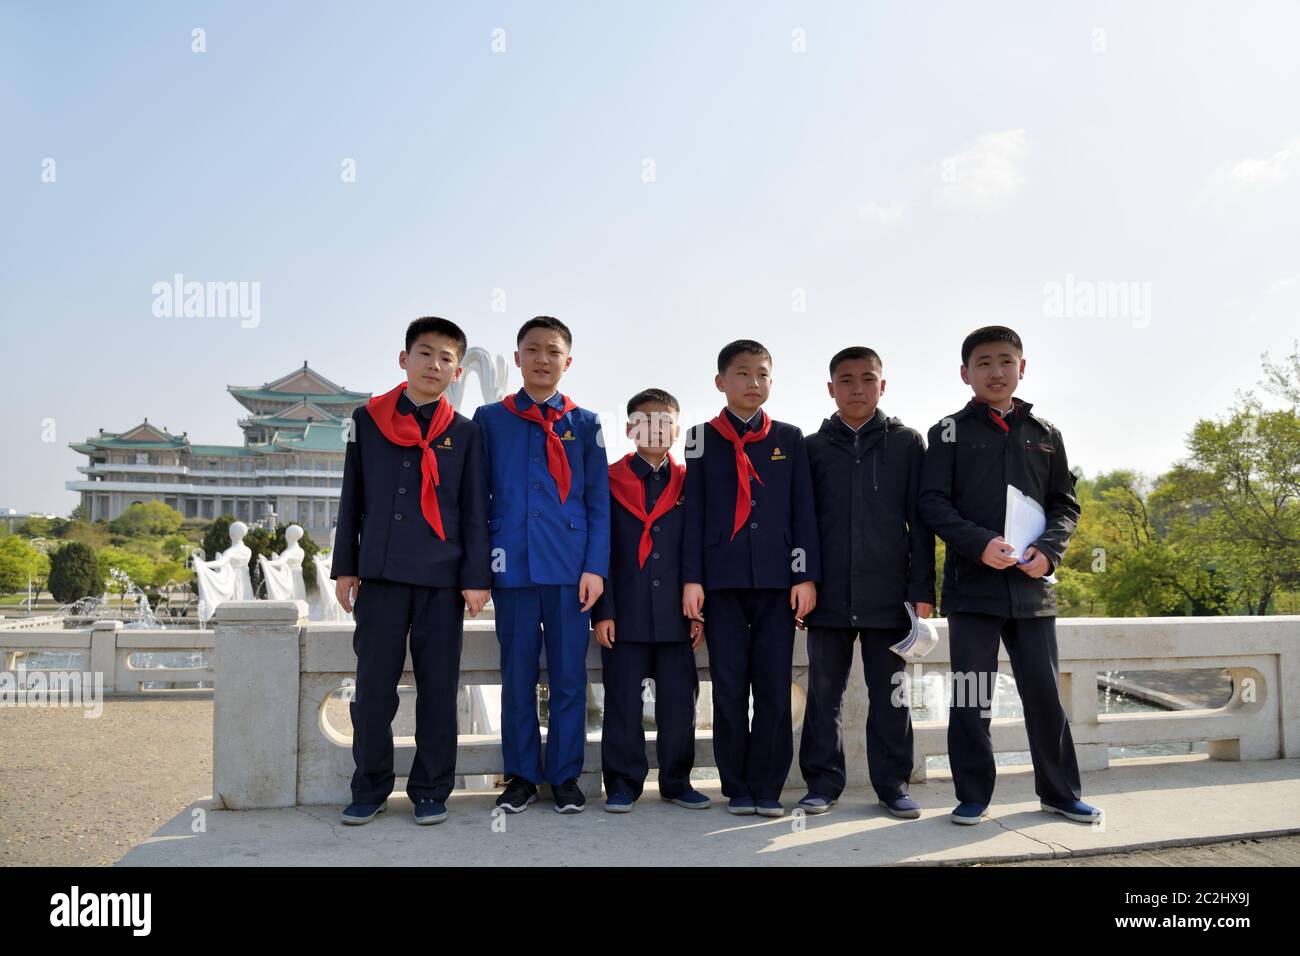 Pyongyang, North Korea - April 29, 2019: Young boys, members of the Korean Children's Union KCU, Young Pioneer Corps, on a city street Stock Photo